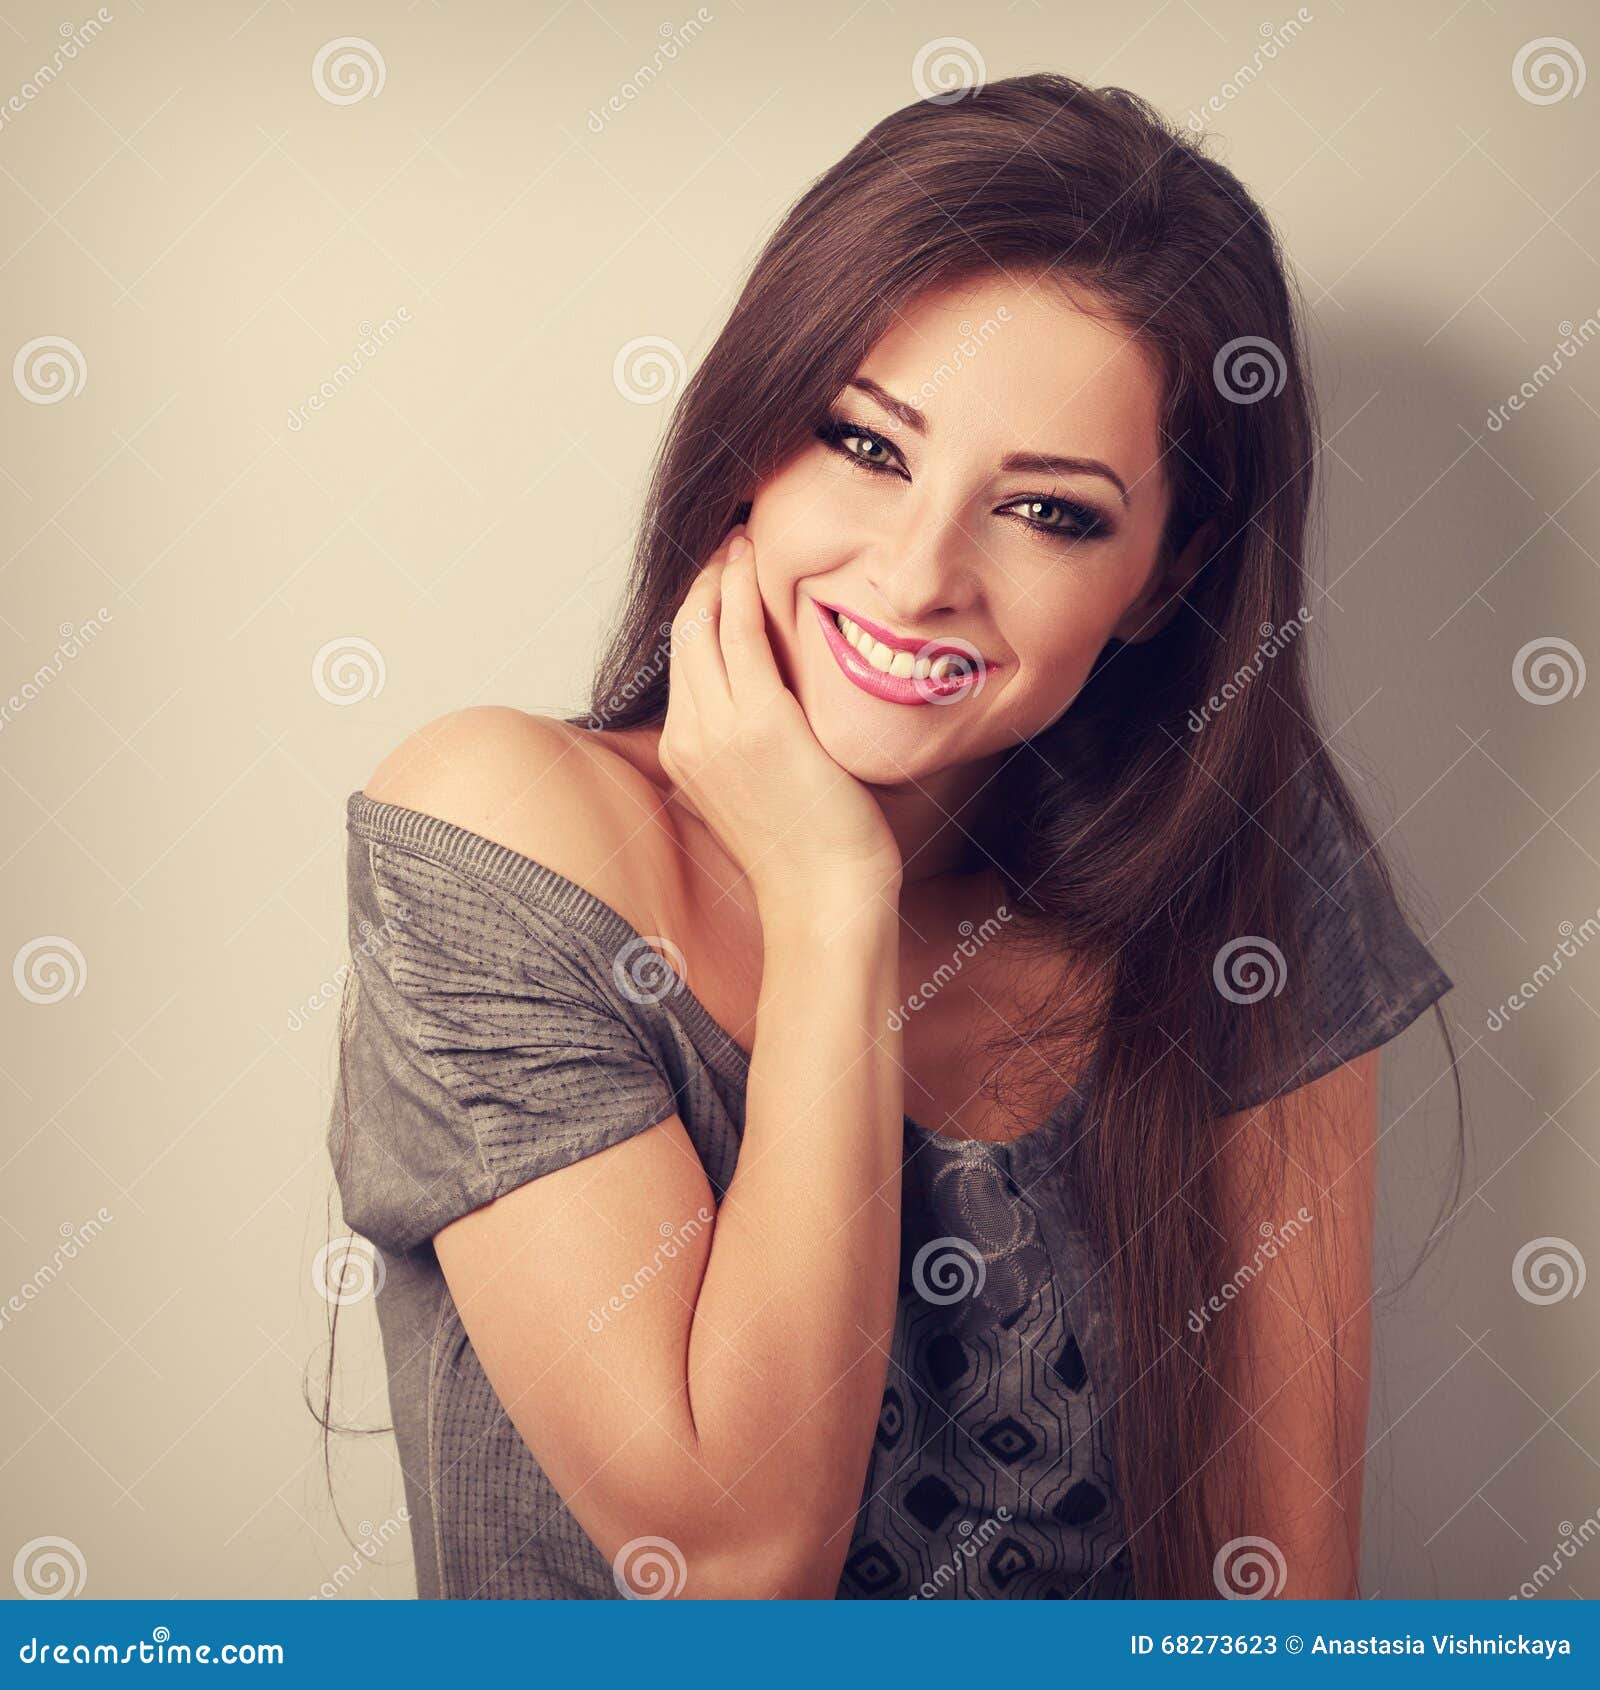 happy toothy smiling young woman with long hair in fashion blouse. coseup vintage toned portrait